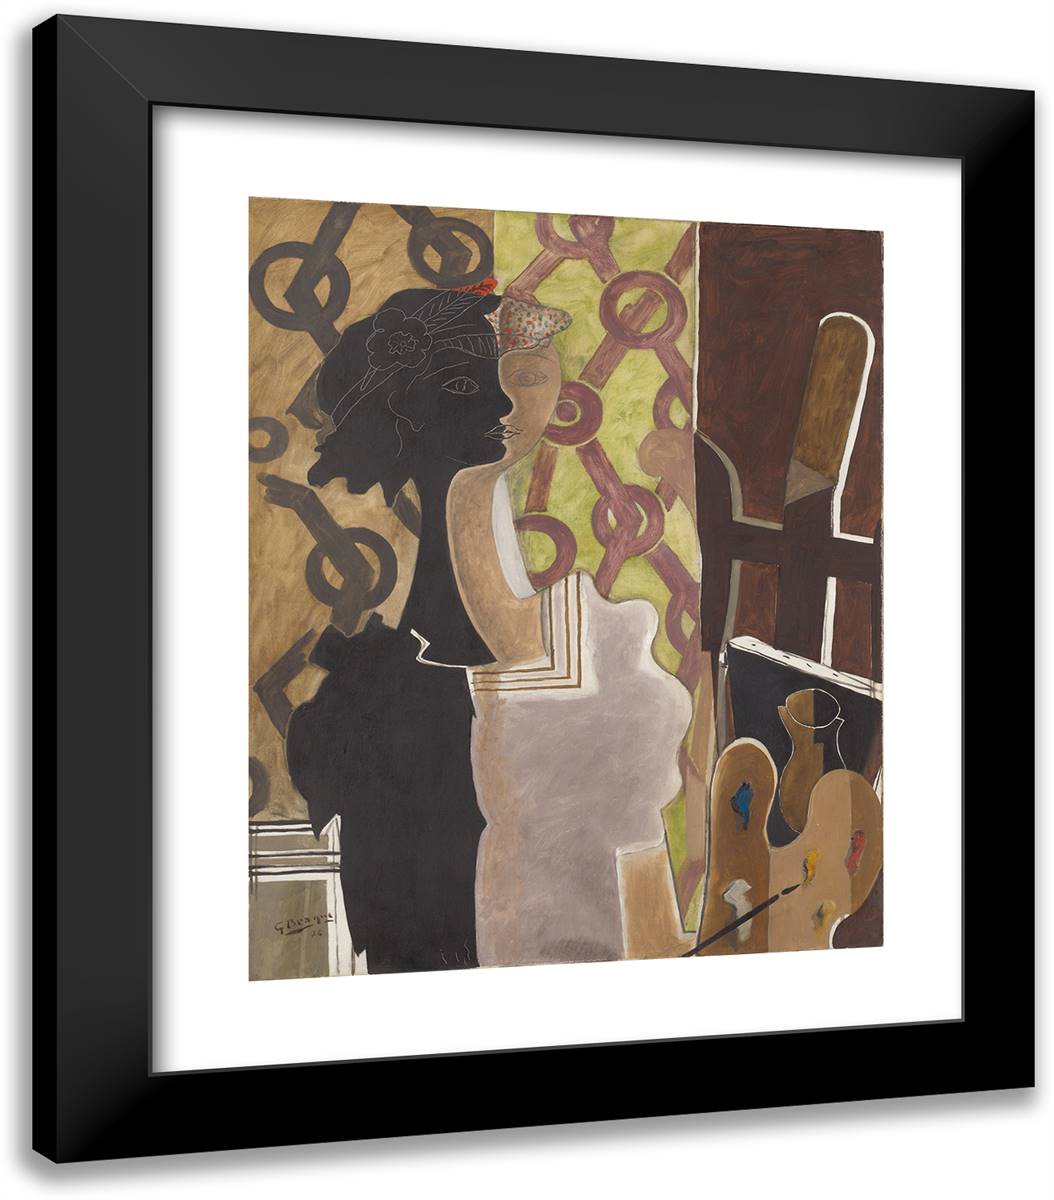 Woman at an Easel (Green Screen) 20x23 Black Modern Wood Framed Art Print Poster by Braque, Georges